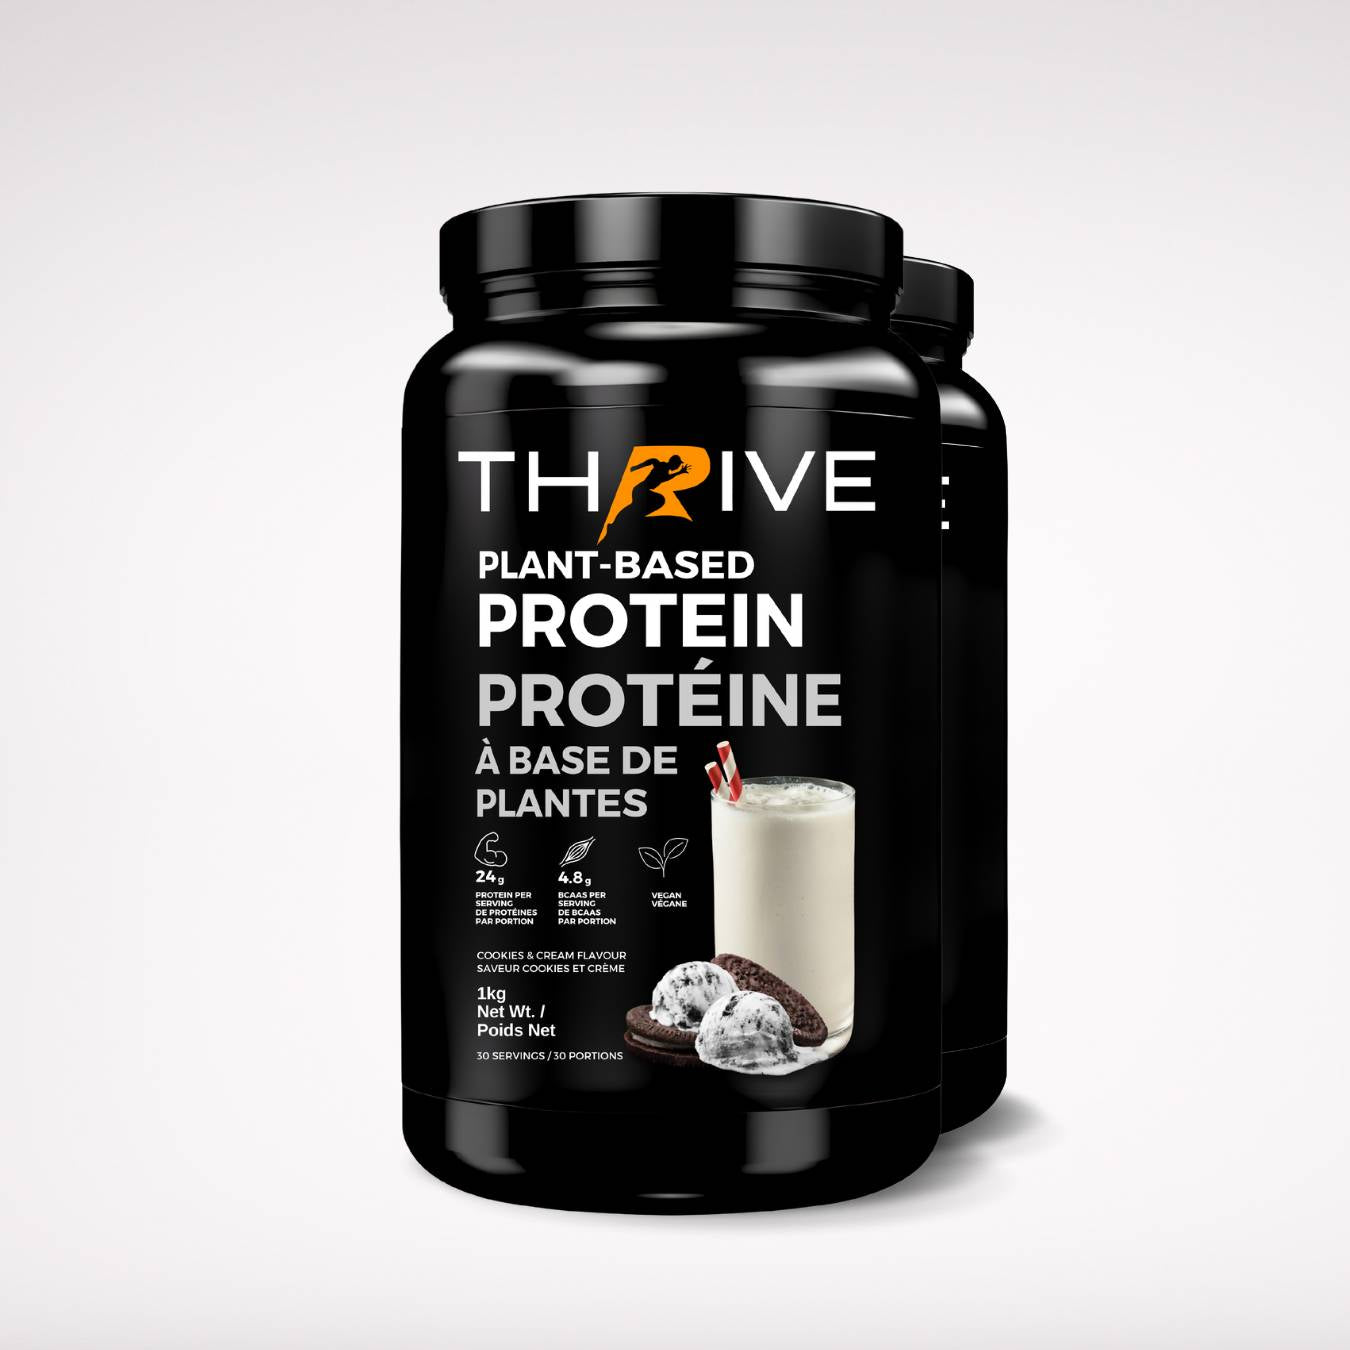 Thrive Plant-Based Protein Cookies & Cream (2 Units)